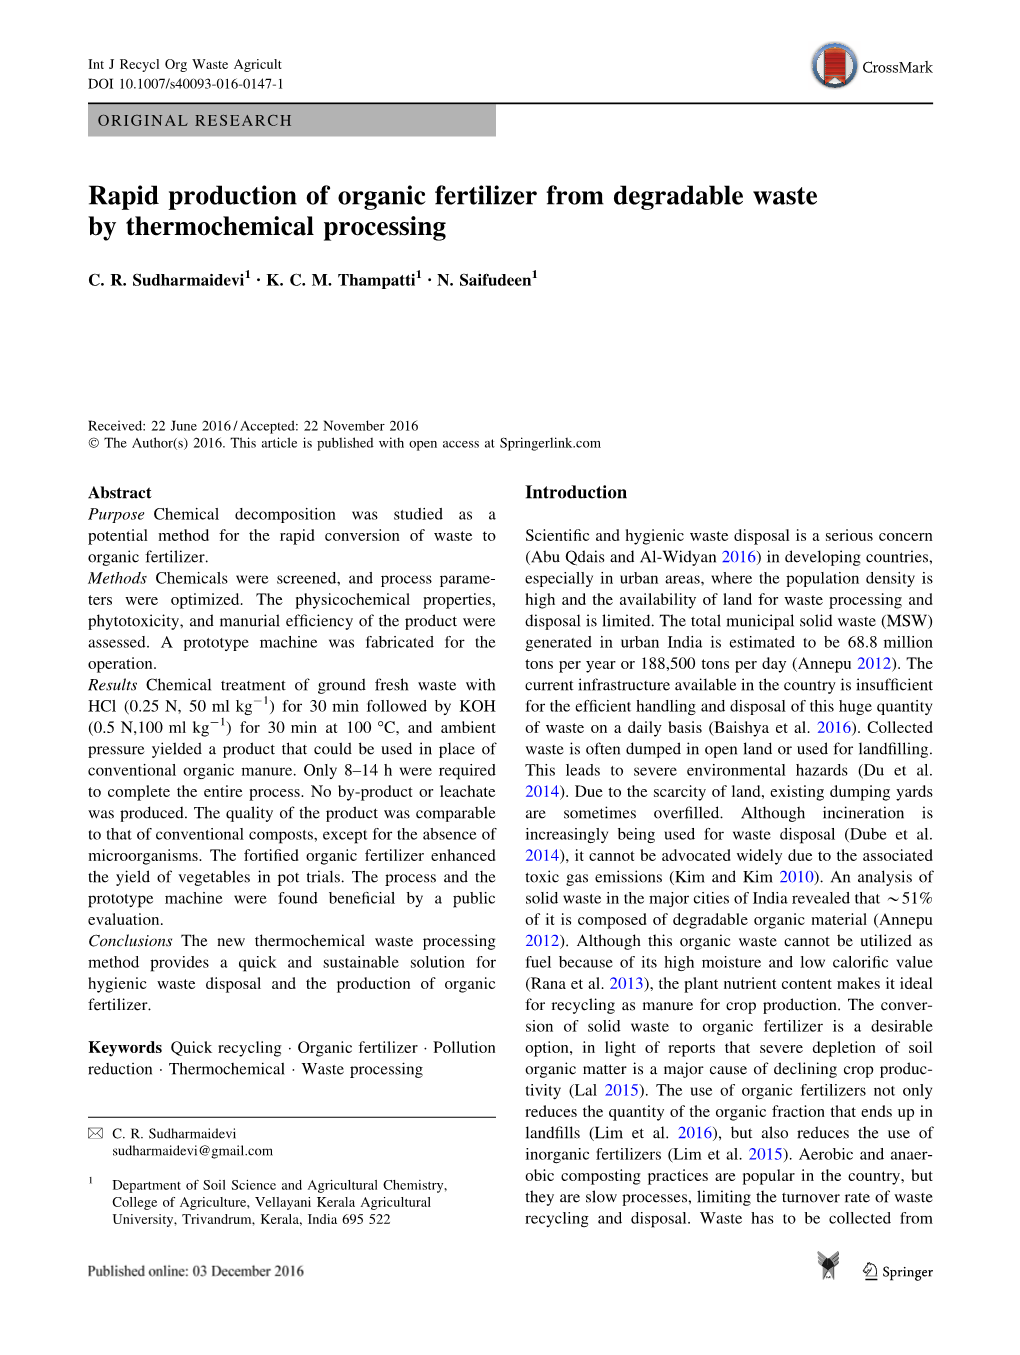 Rapid Production of Organic Fertilizer from Degradable Waste by Thermochemical Processing